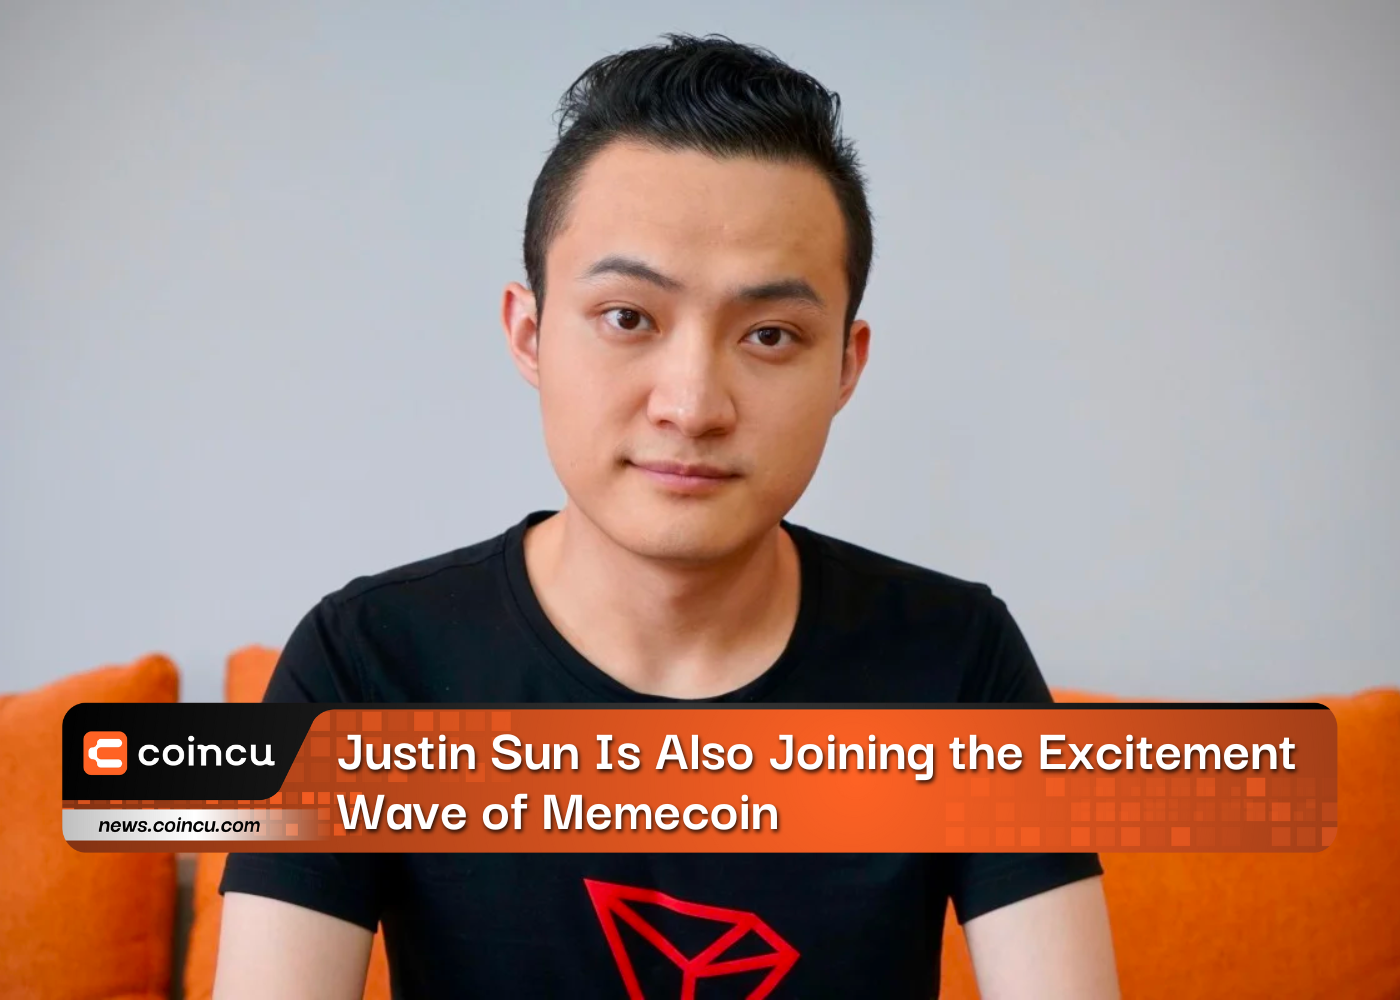 Justin Sun Is Also Joining the Excitement Wave of Memecoin